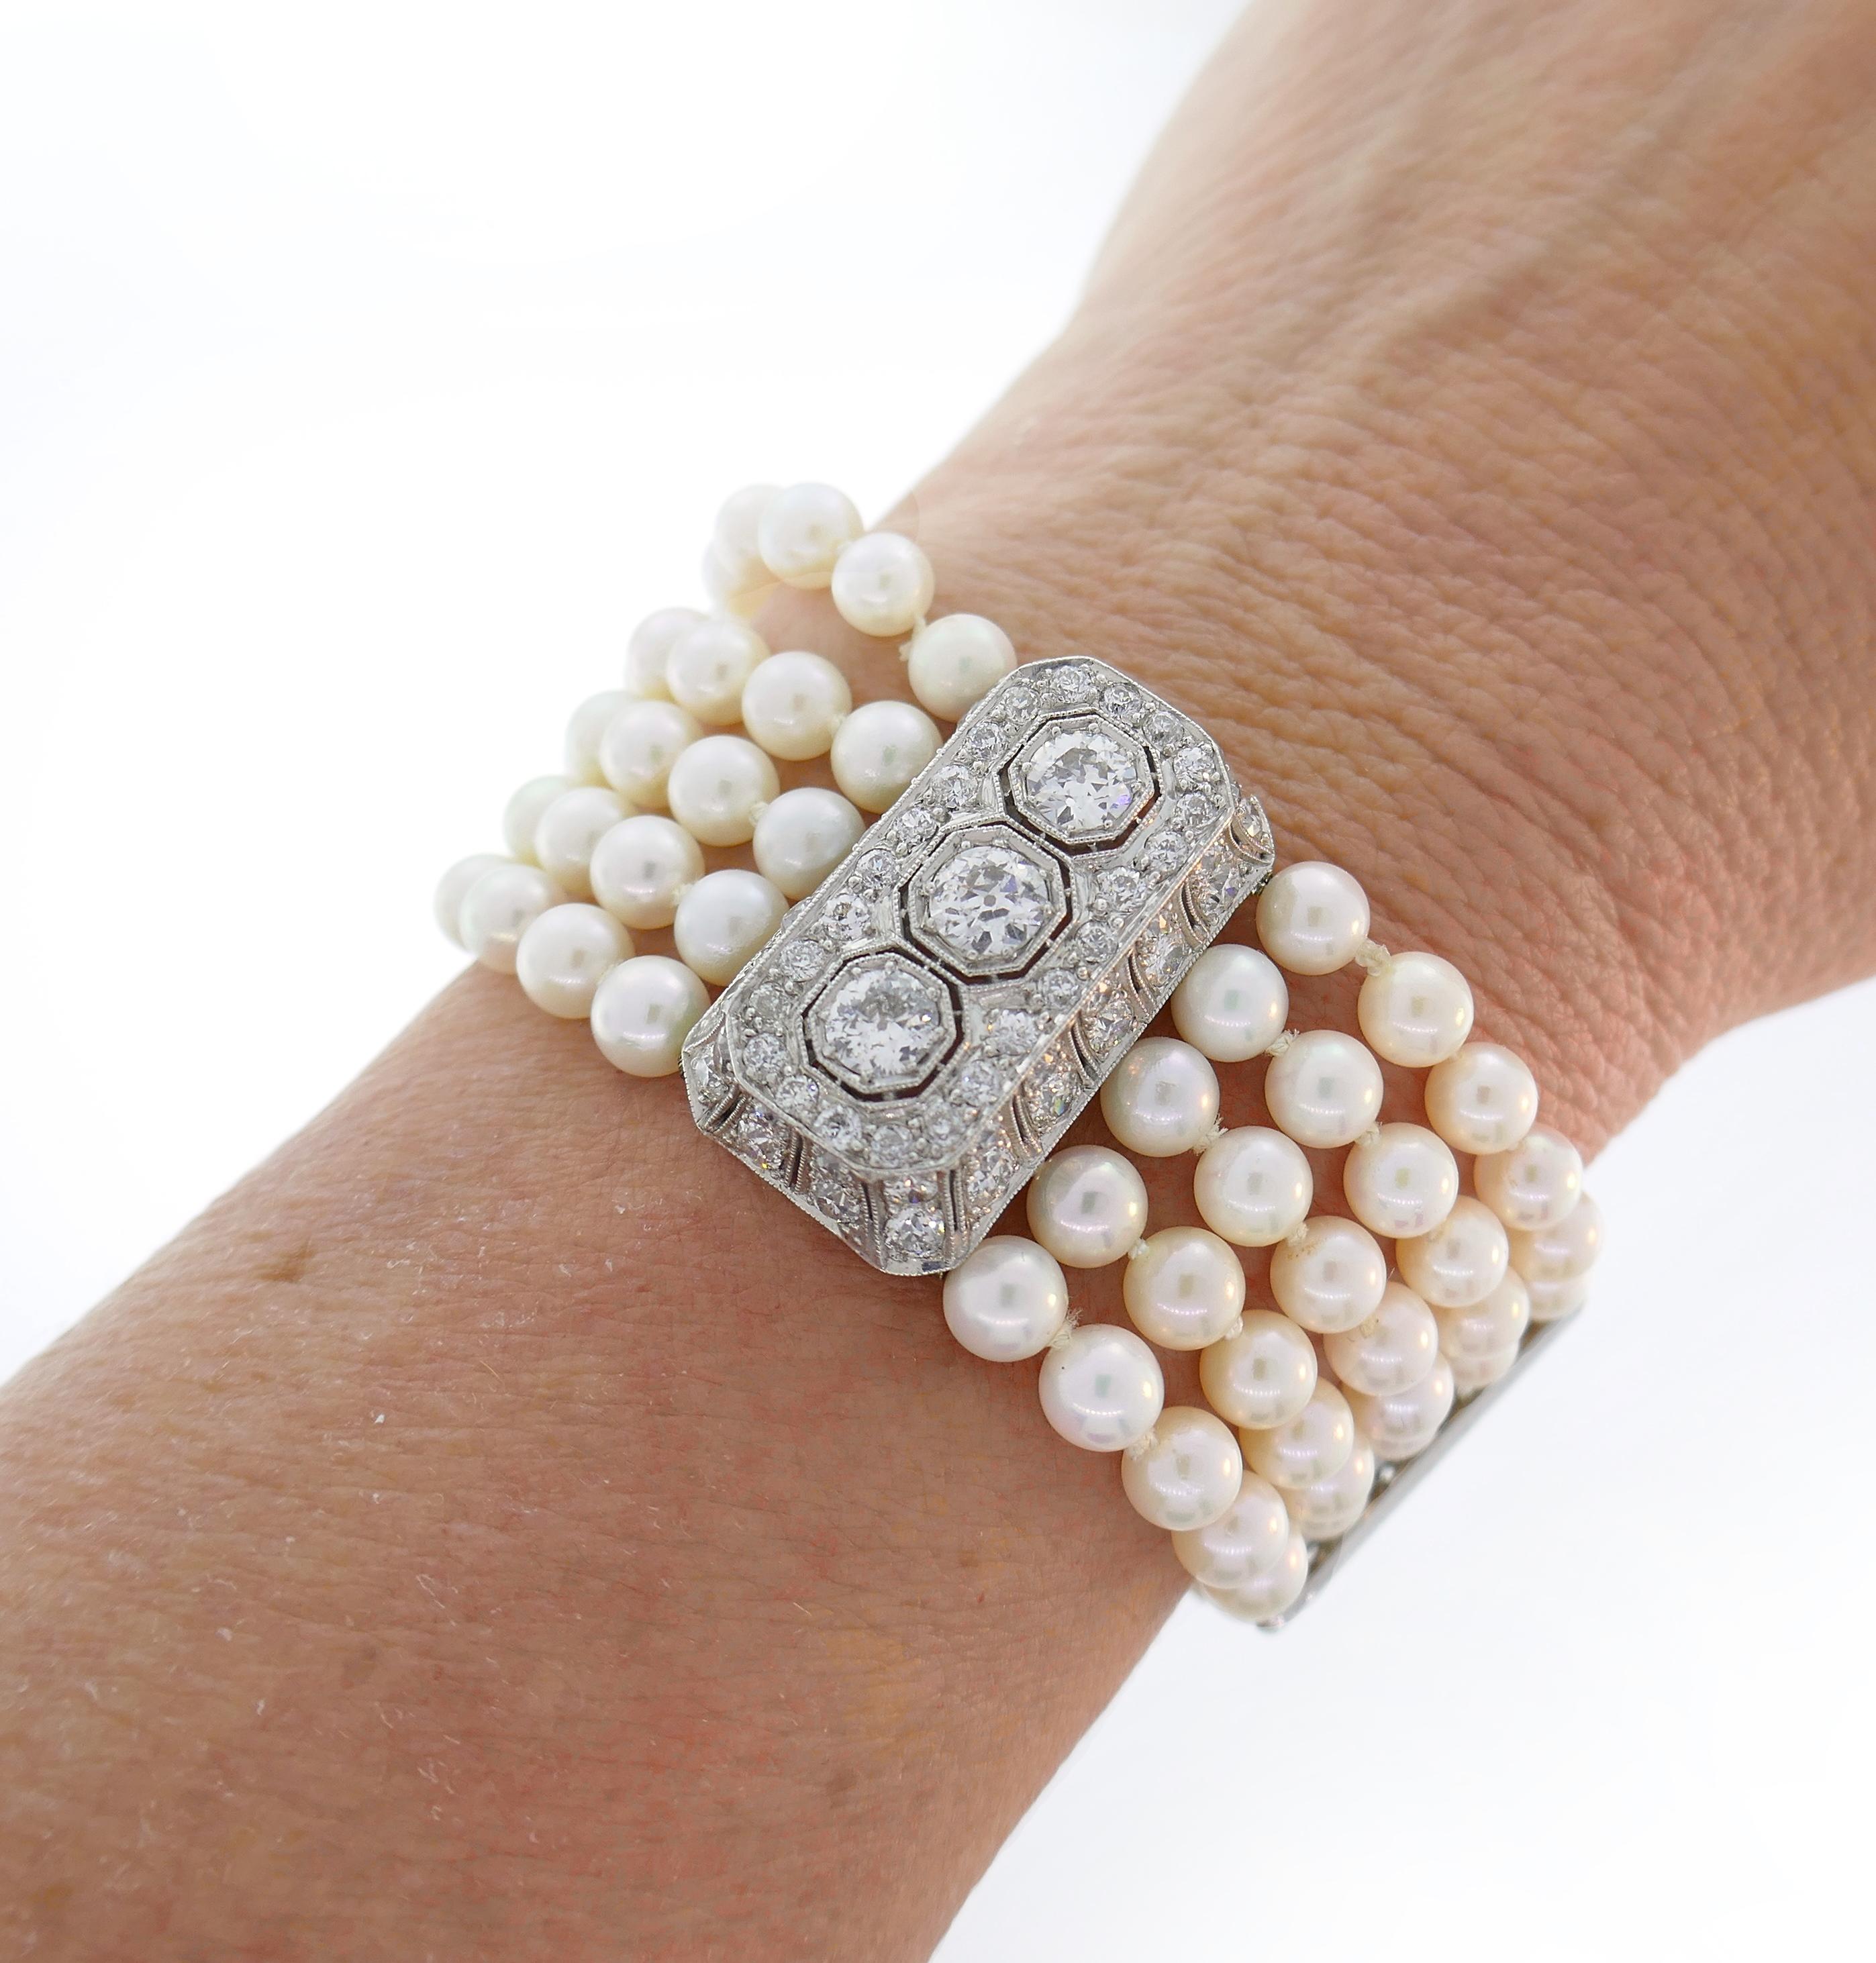 Gorgeous bracelet featuring five-strand Akoya pearl with two  platinum bars set with diamonds and culminating with an elevated platinum bar all studded with diamonds. Feminine, elegant and timeless, the bracelet is a great addition to your jewelry